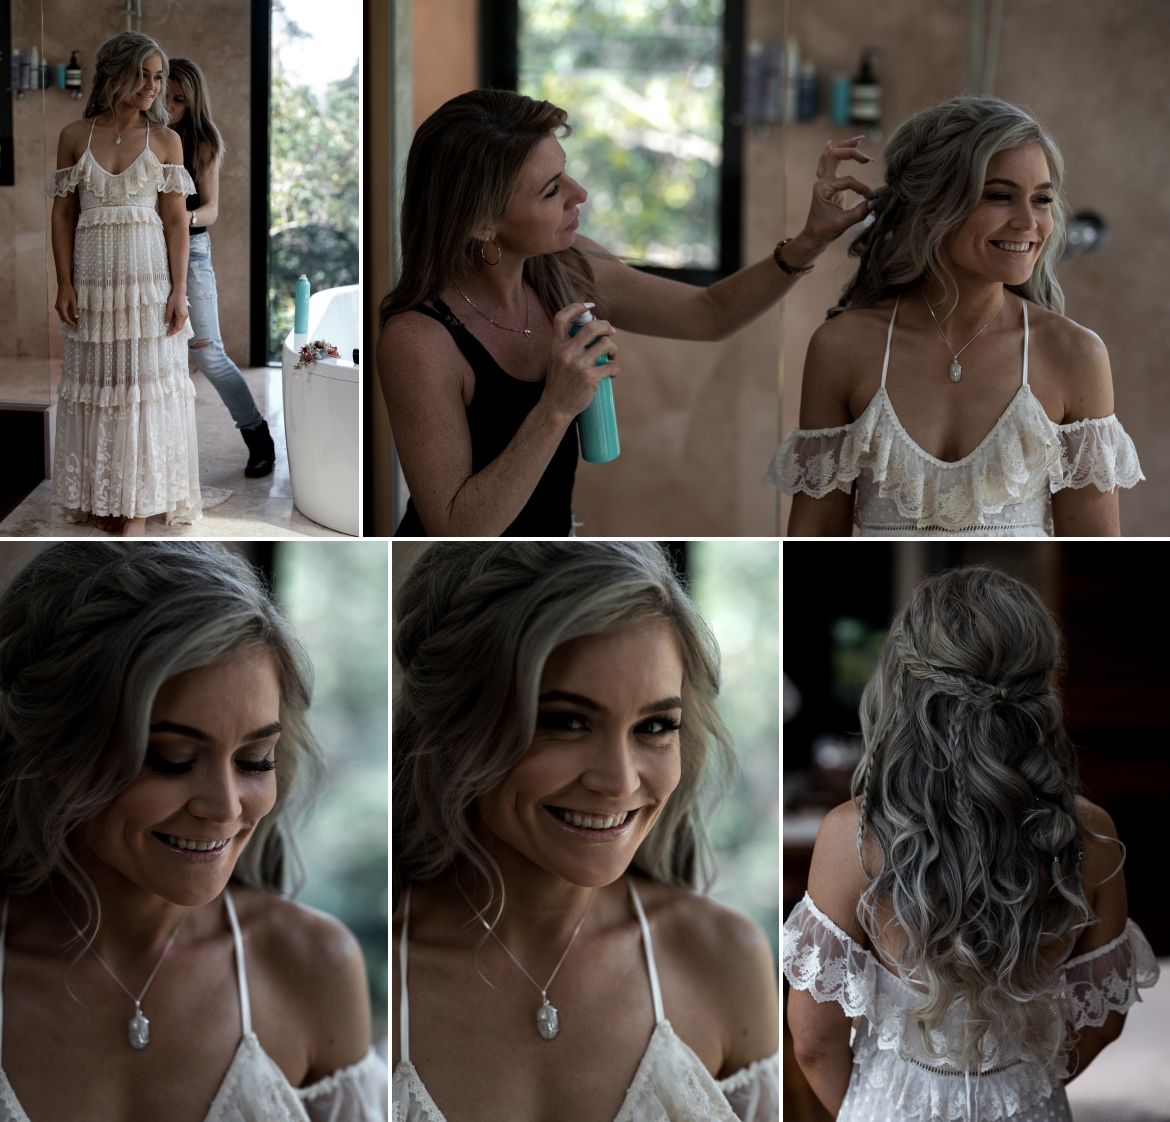 Crystal creek rainforest retreat elopement hair and makeup for the bride. With ingalisa and bohoelope